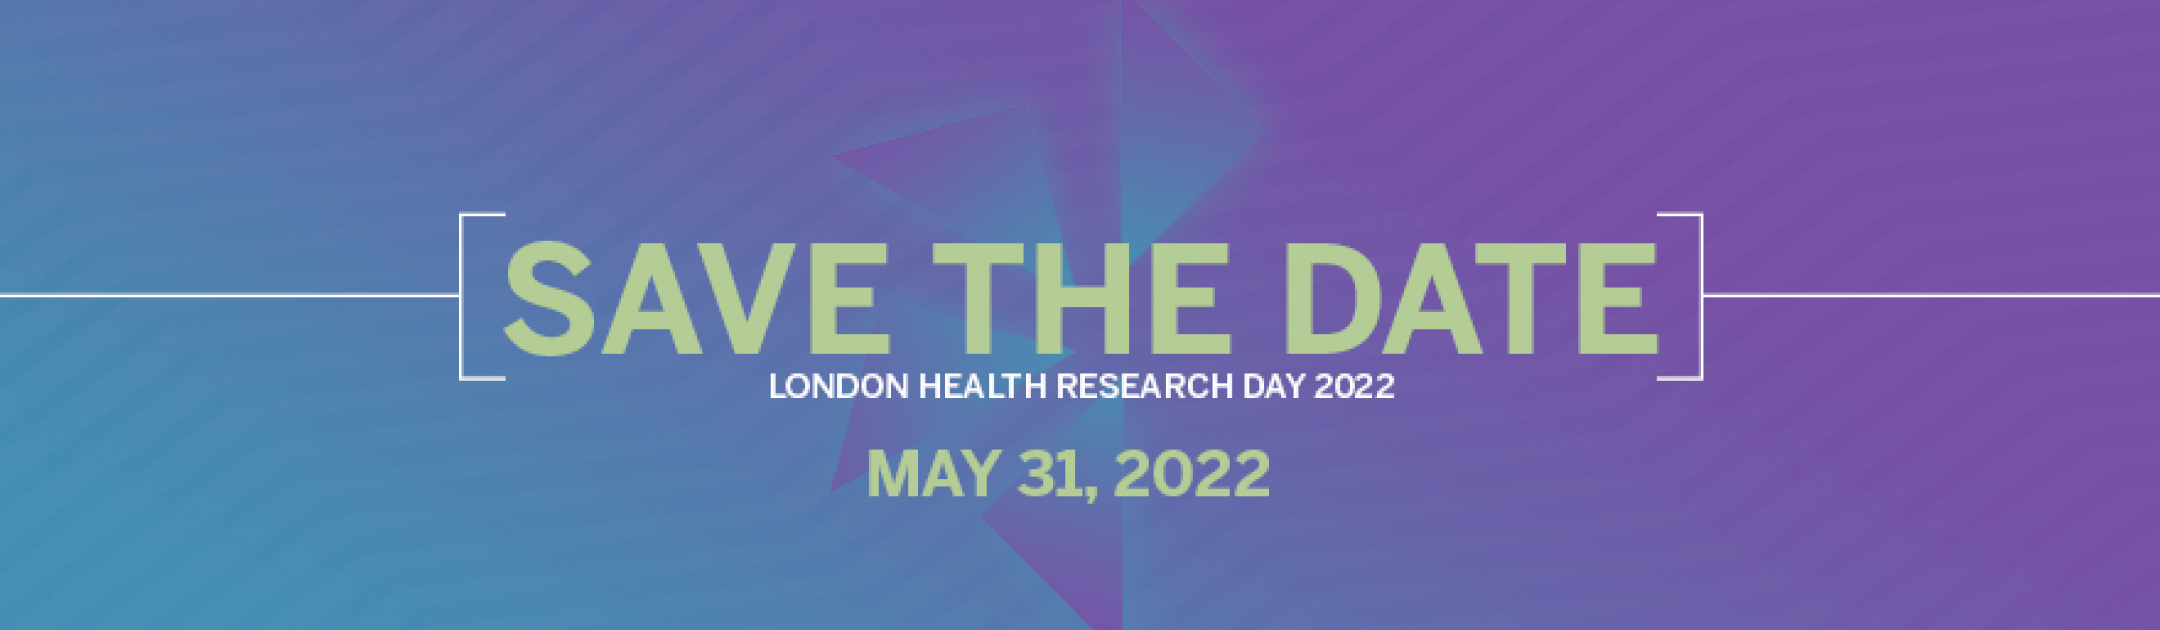 London Health Research Day 2022